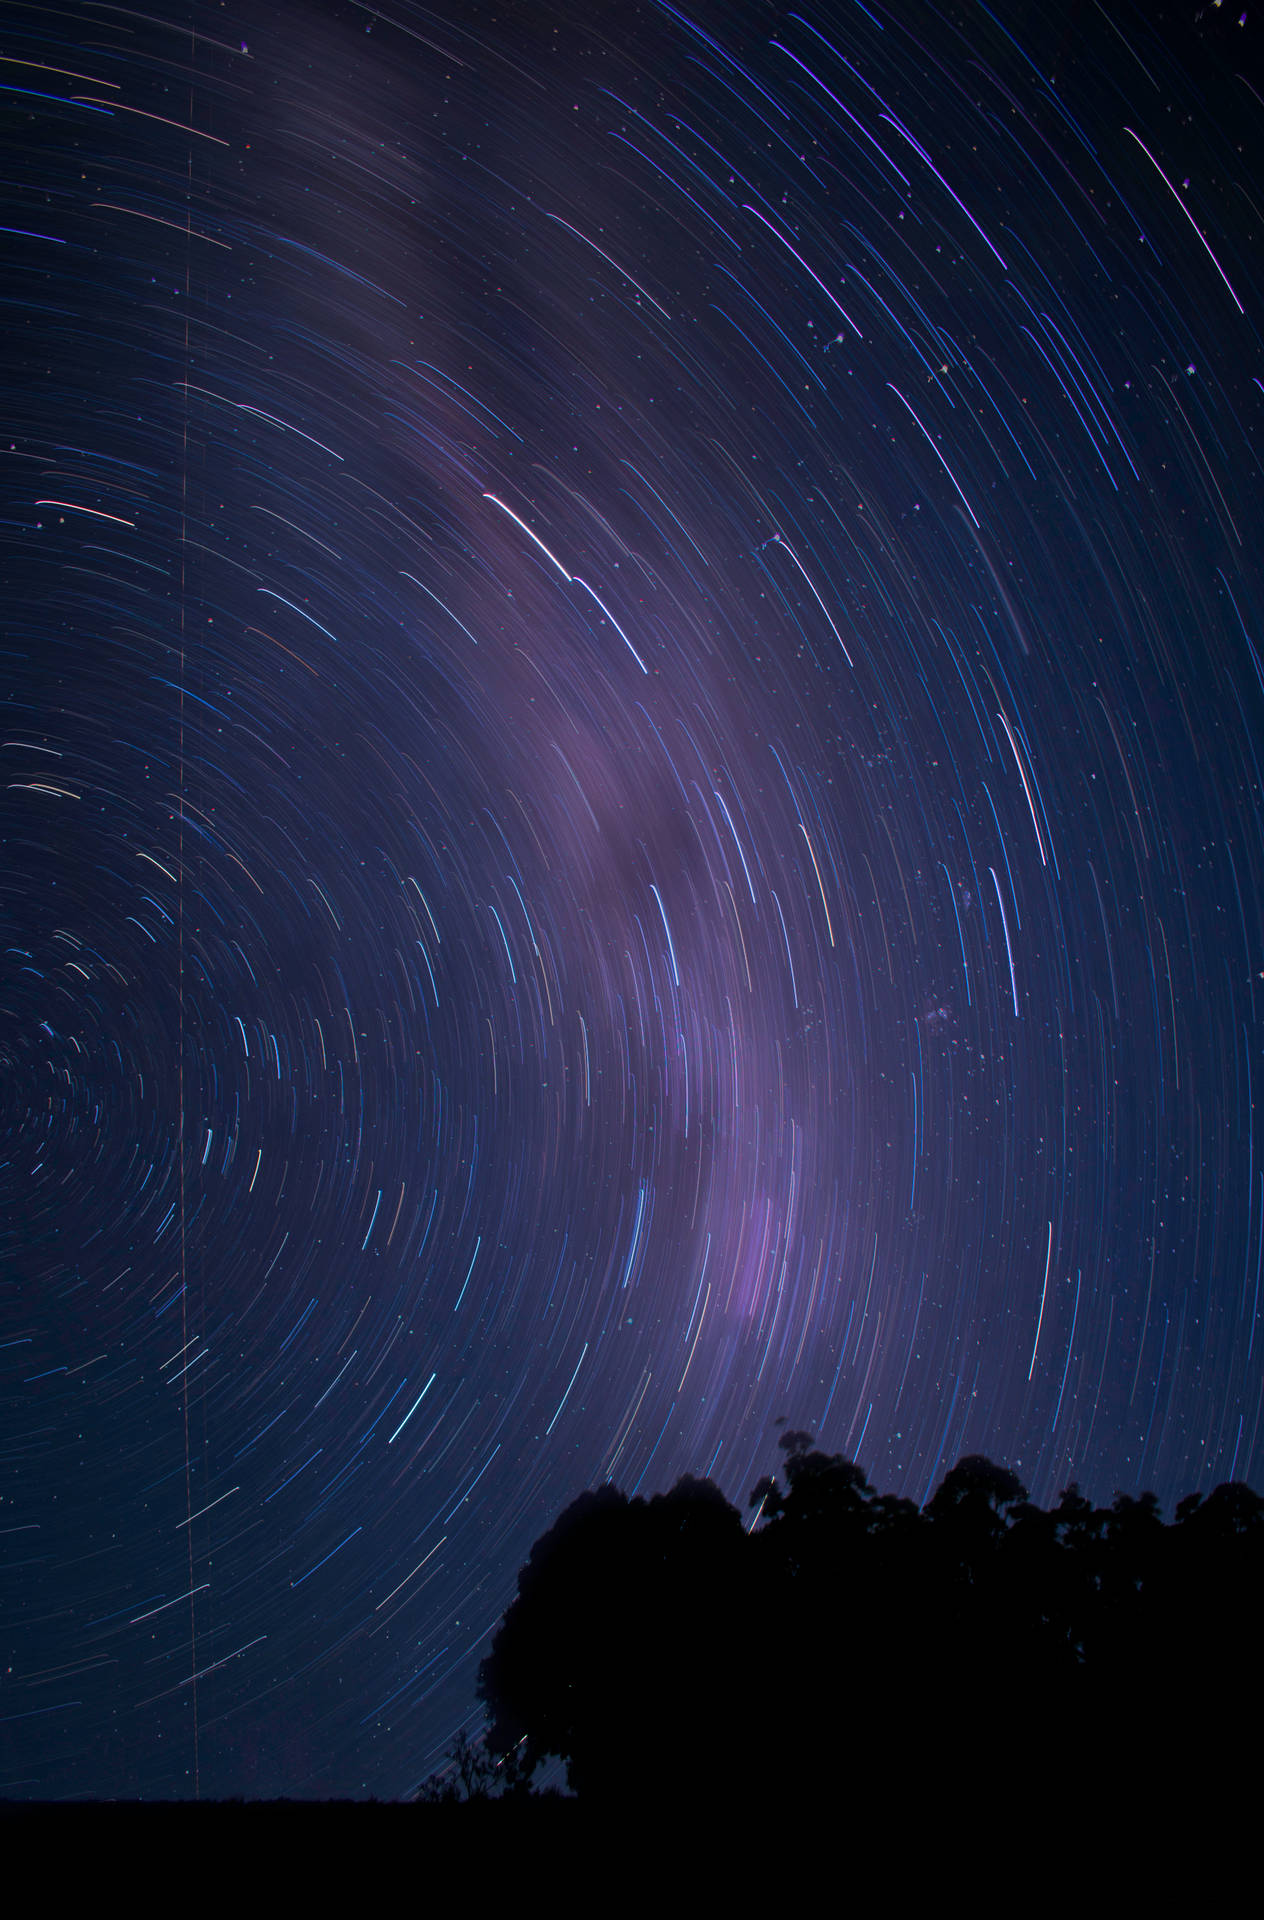 A Time-lapse of the Incredible Star-filled Galaxy Wallpaper